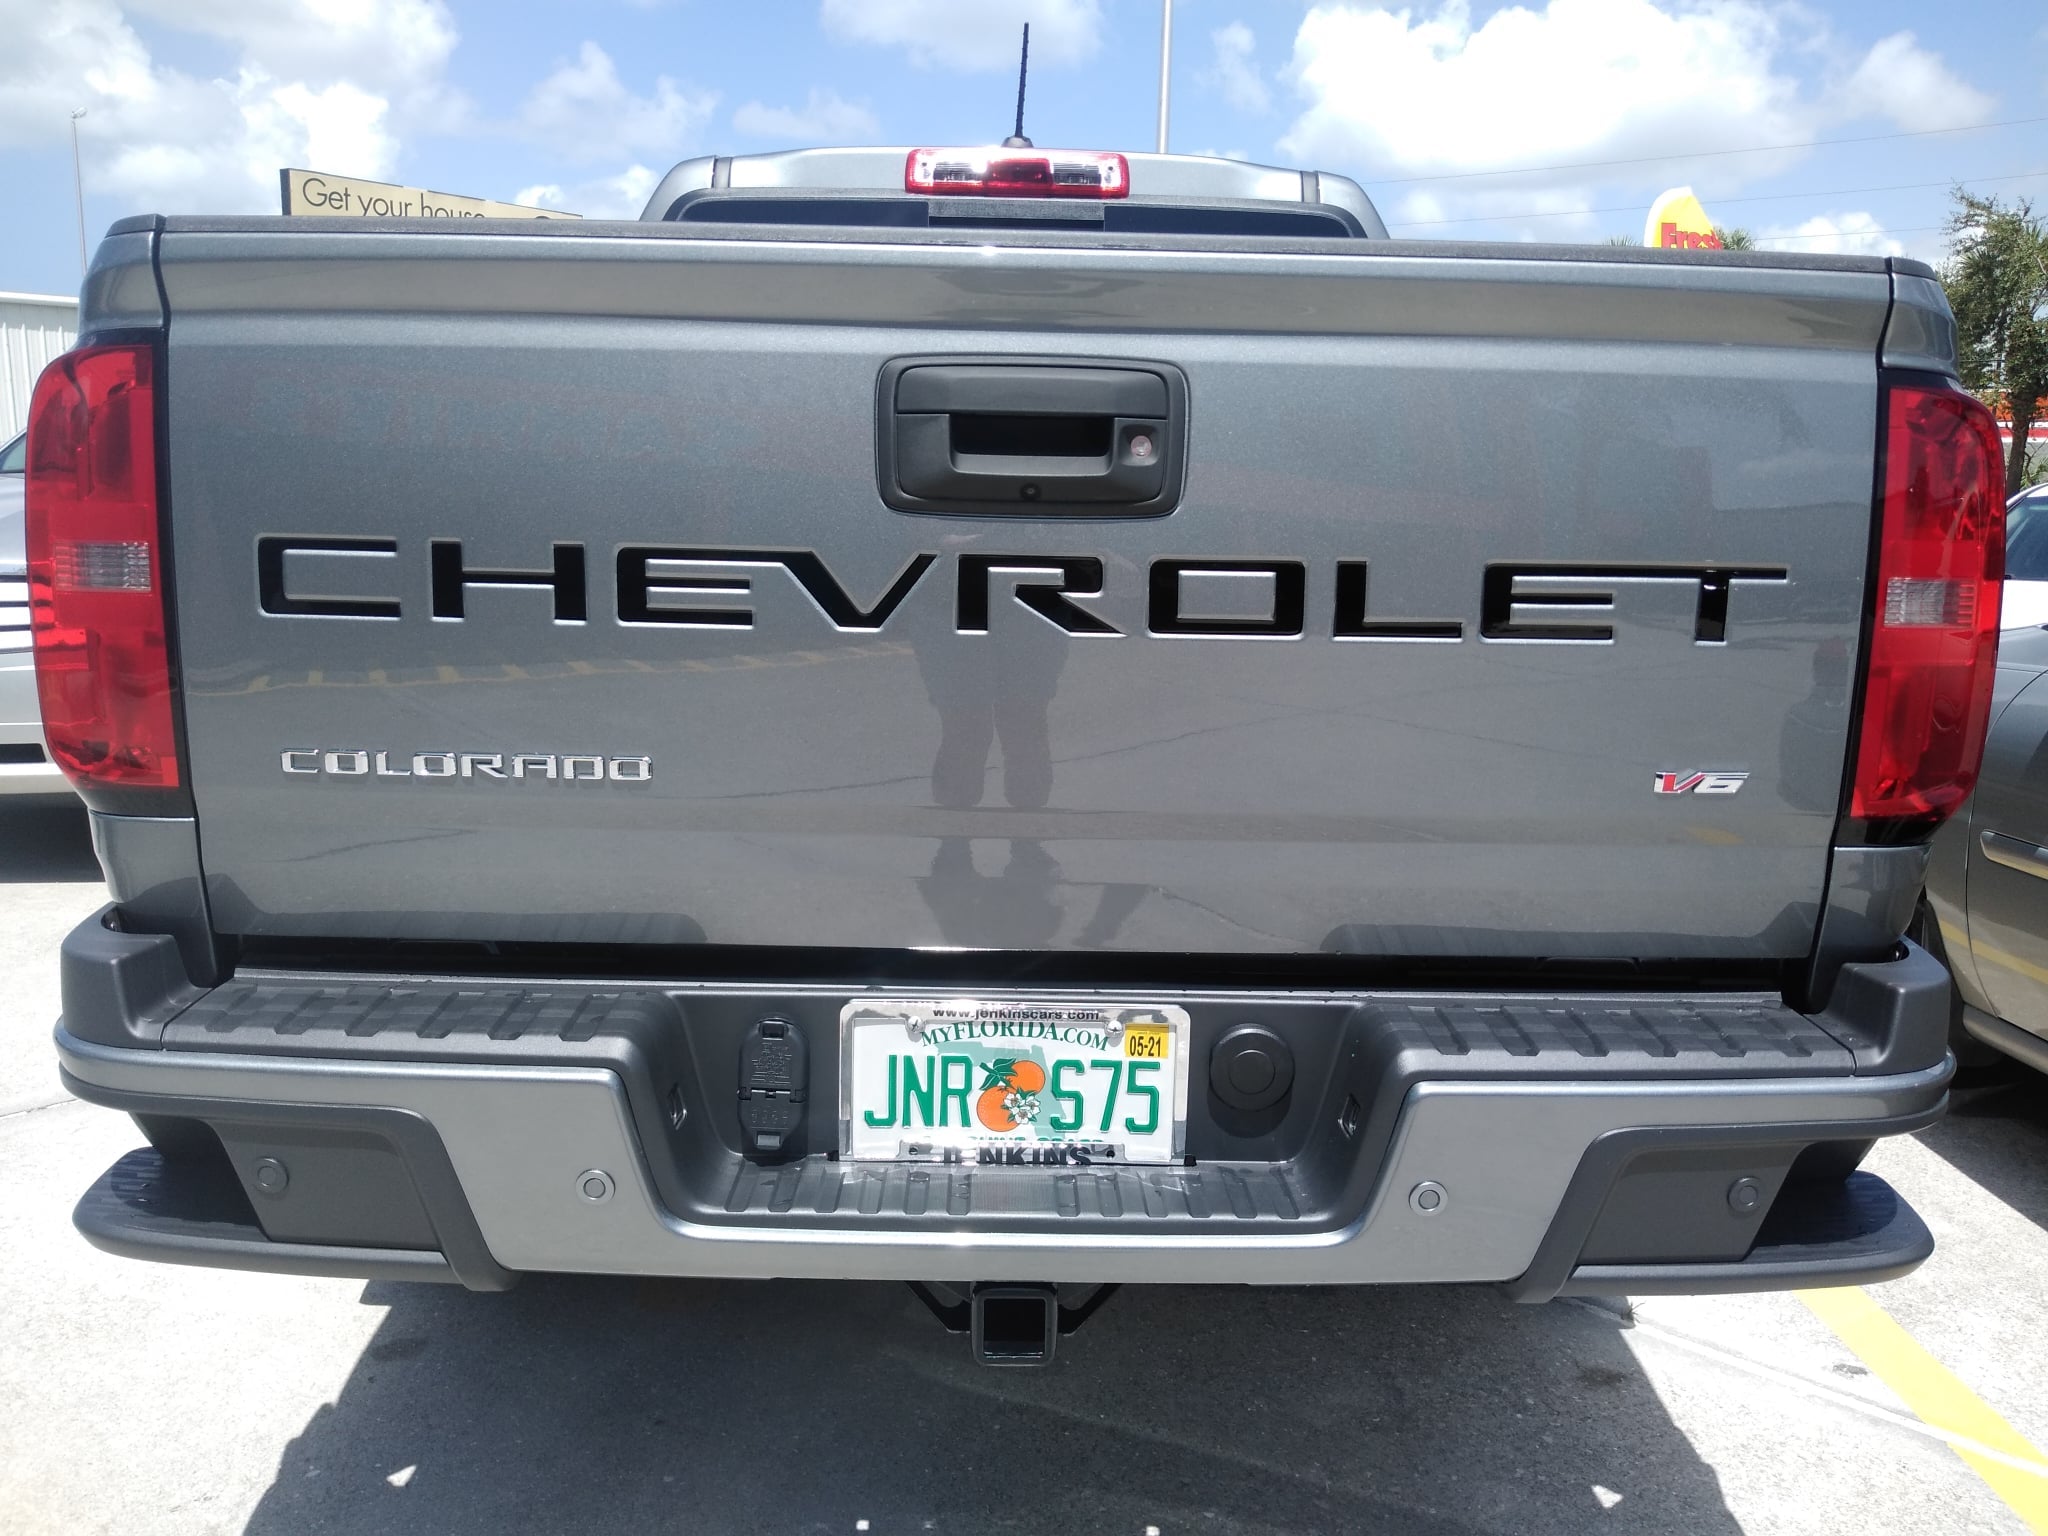 2021 Chevy Colorado Tailgate Letters ABS Plastic